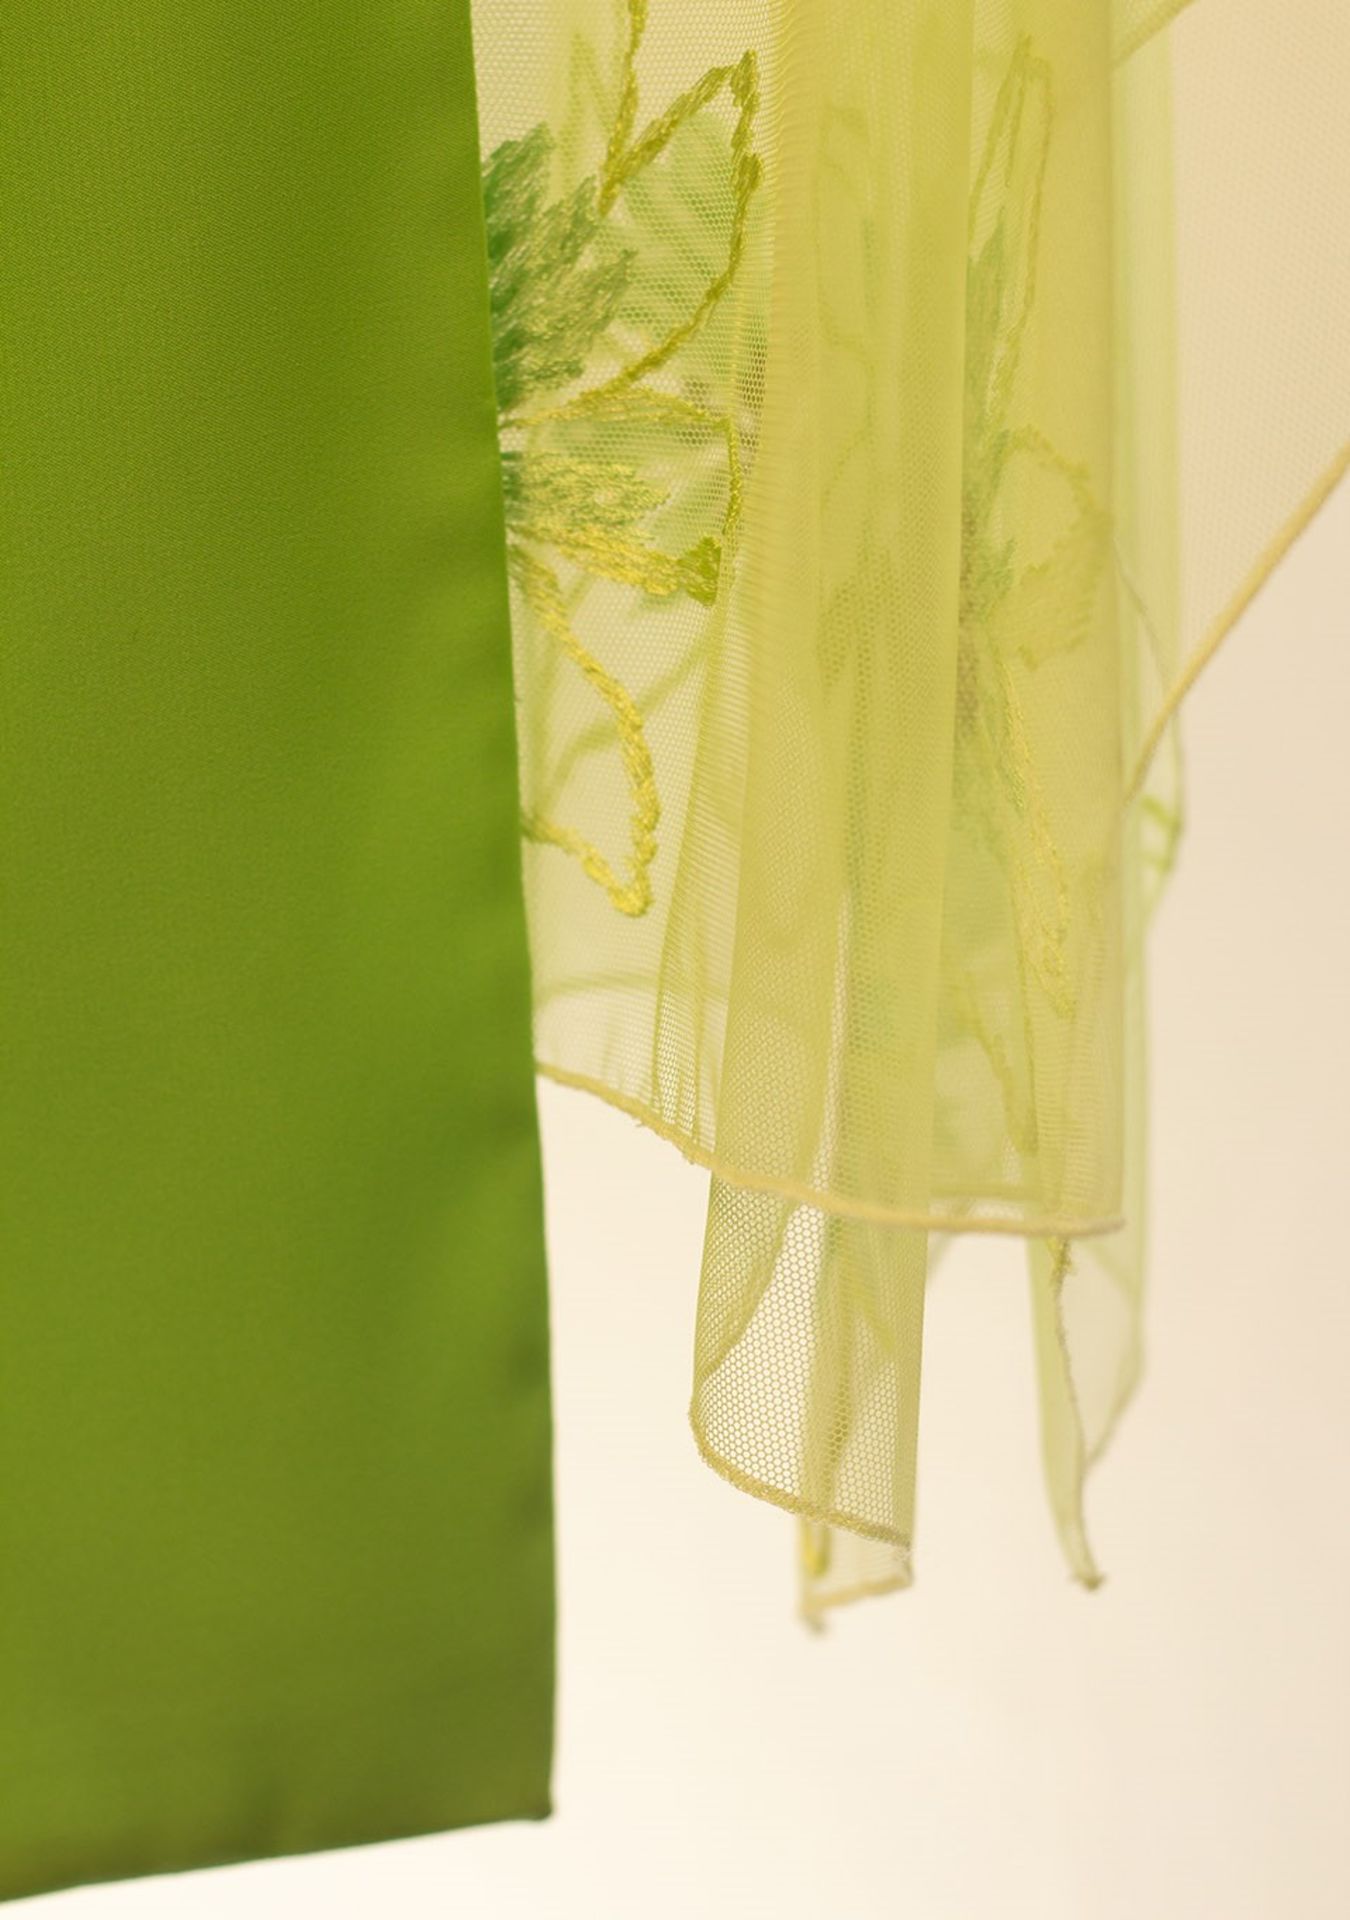 1 x Boutique Le Duc Green Skirt With Matching Scarf And Shawl - Size: 8 - Material: 100% Silk - From - Image 7 of 10